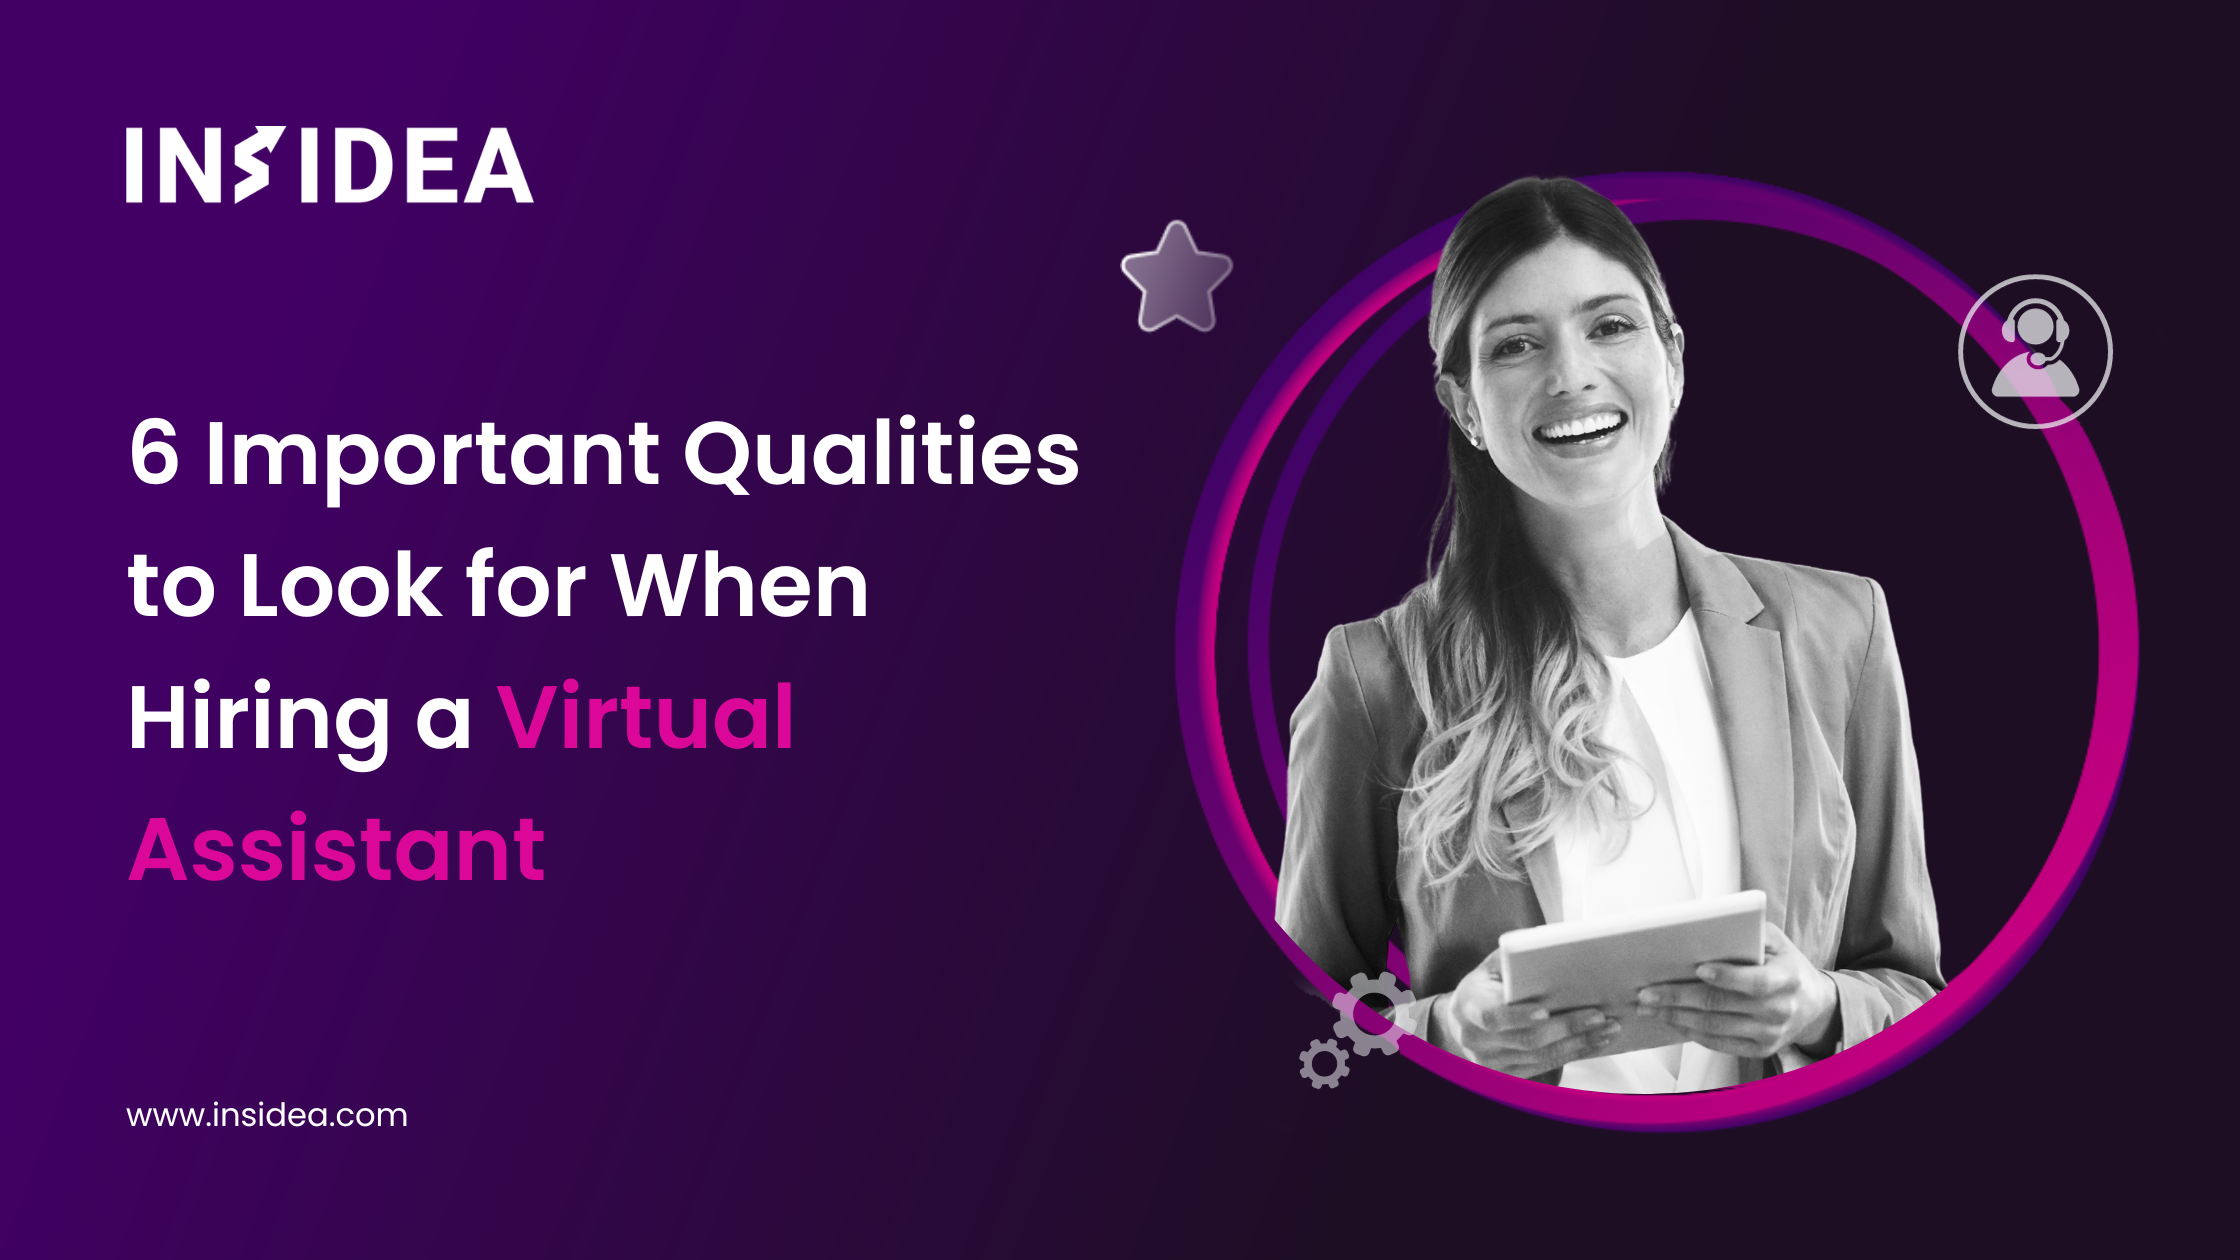 6 Important Qualities to Look for When Hiring a Virtual Assistant